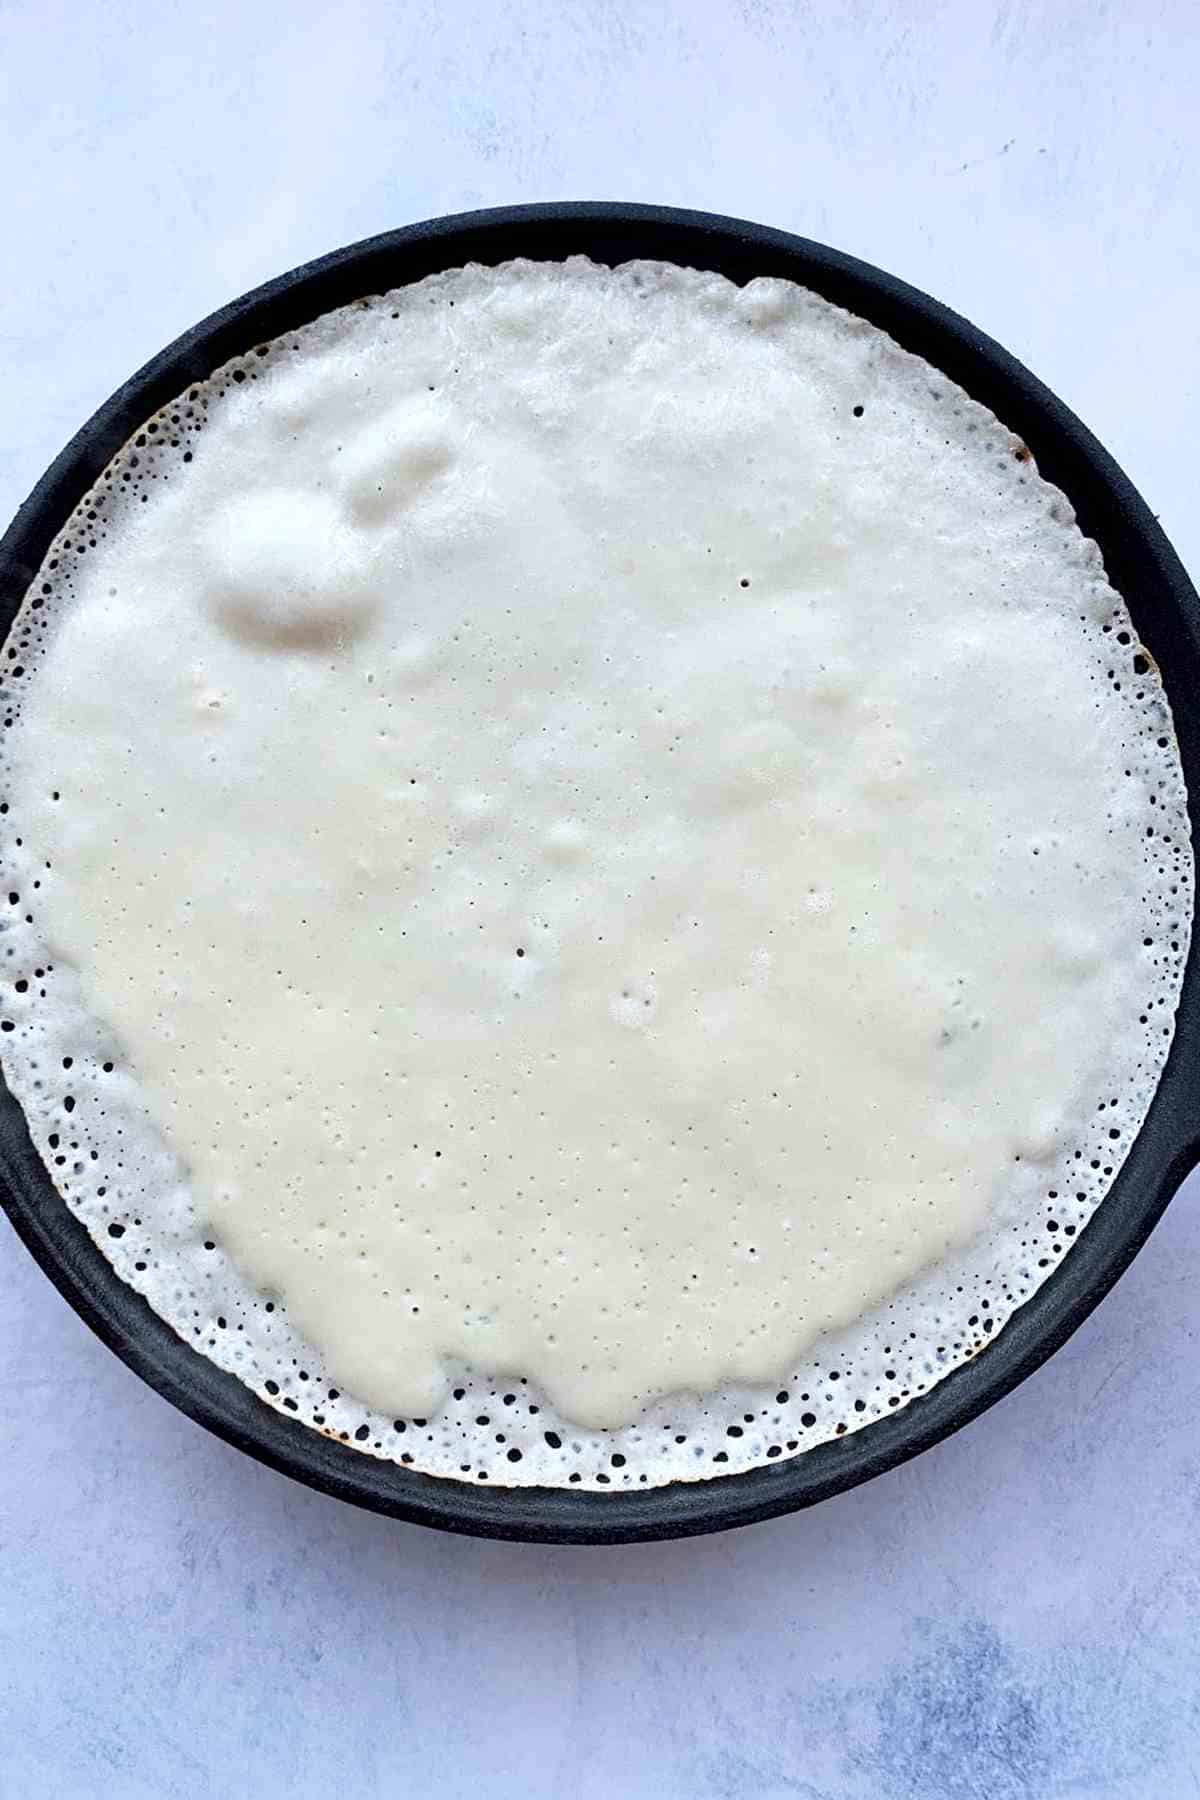 Cooking crepe batter in a pan.